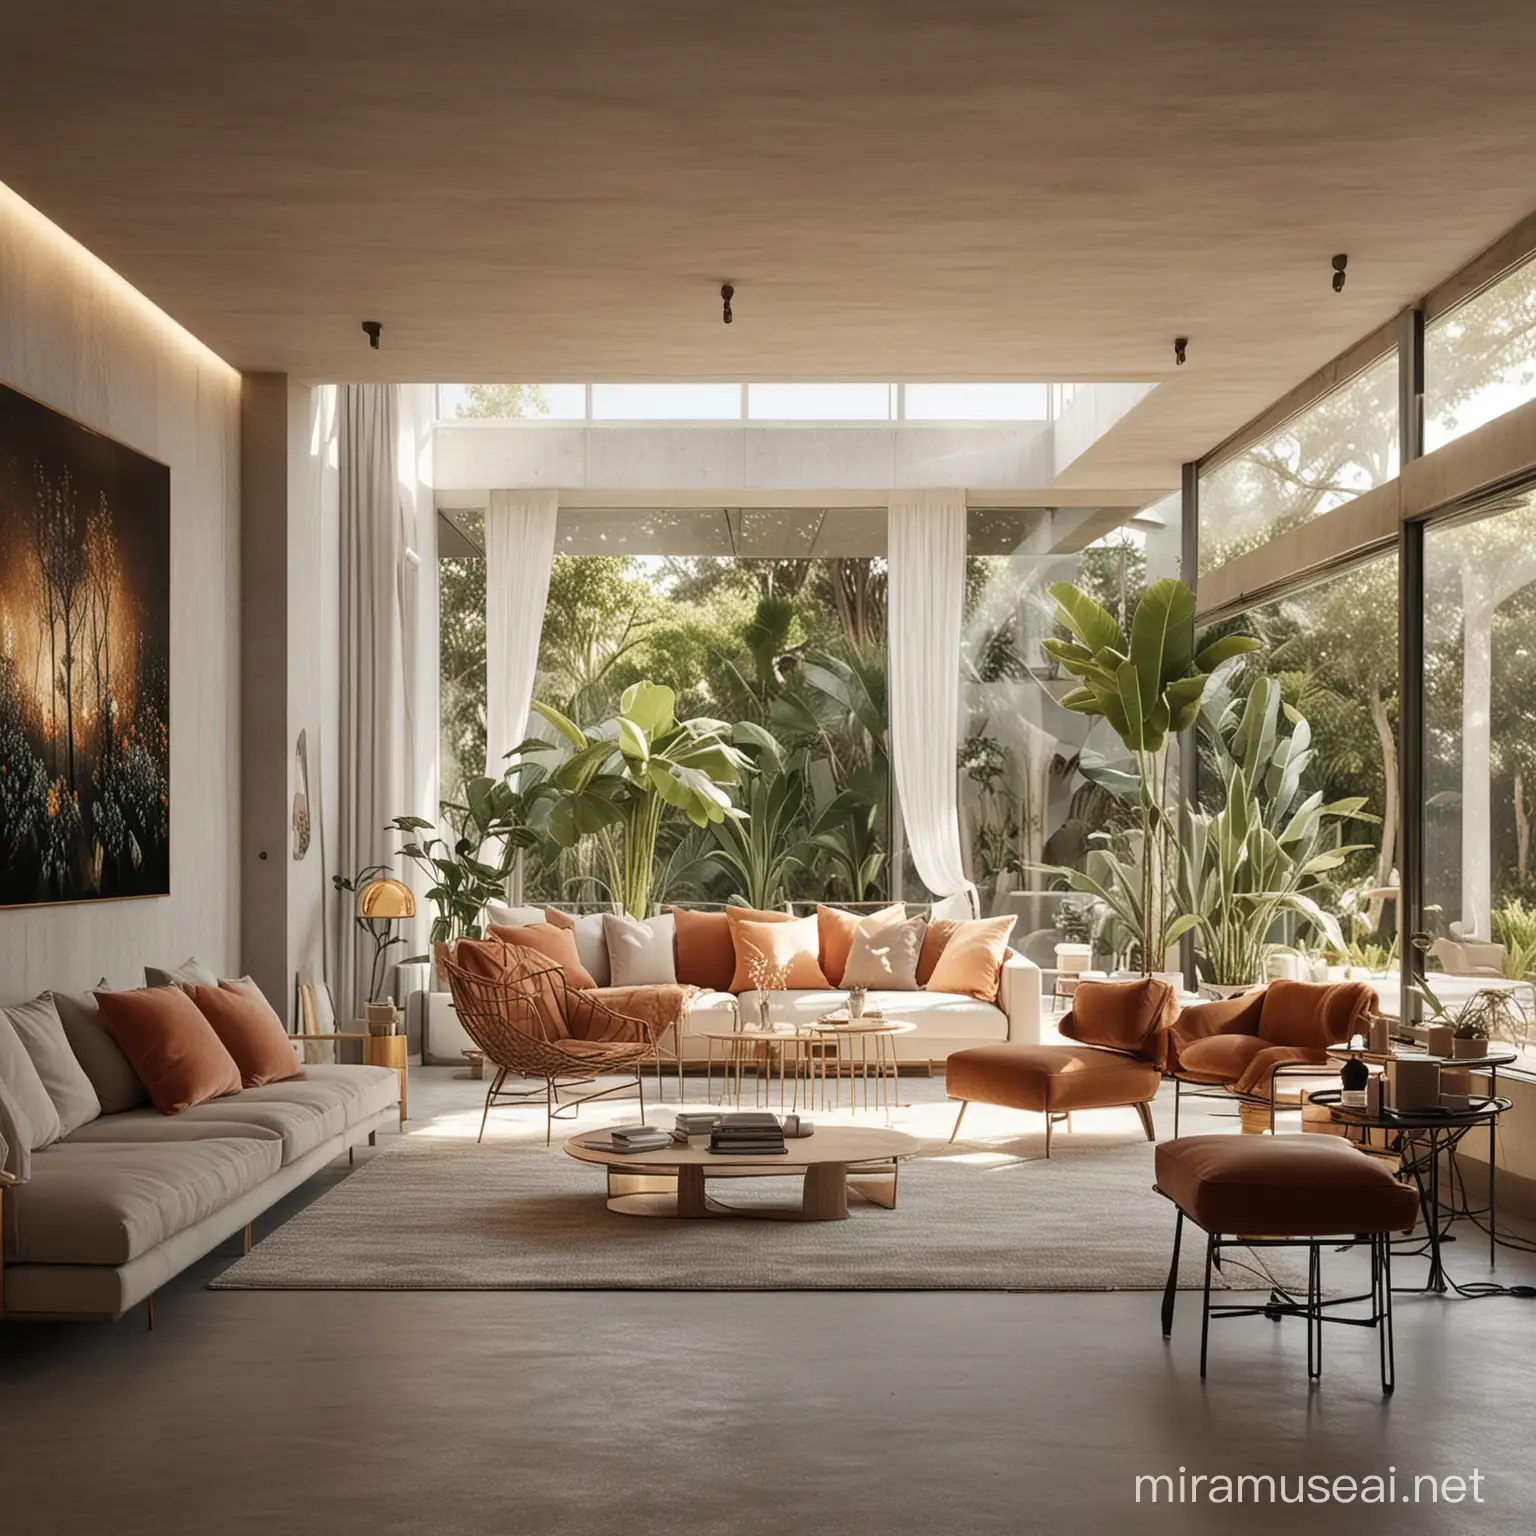 Stunning Modern Architectural Visualization with Lush Interiors and Trendy Accessories